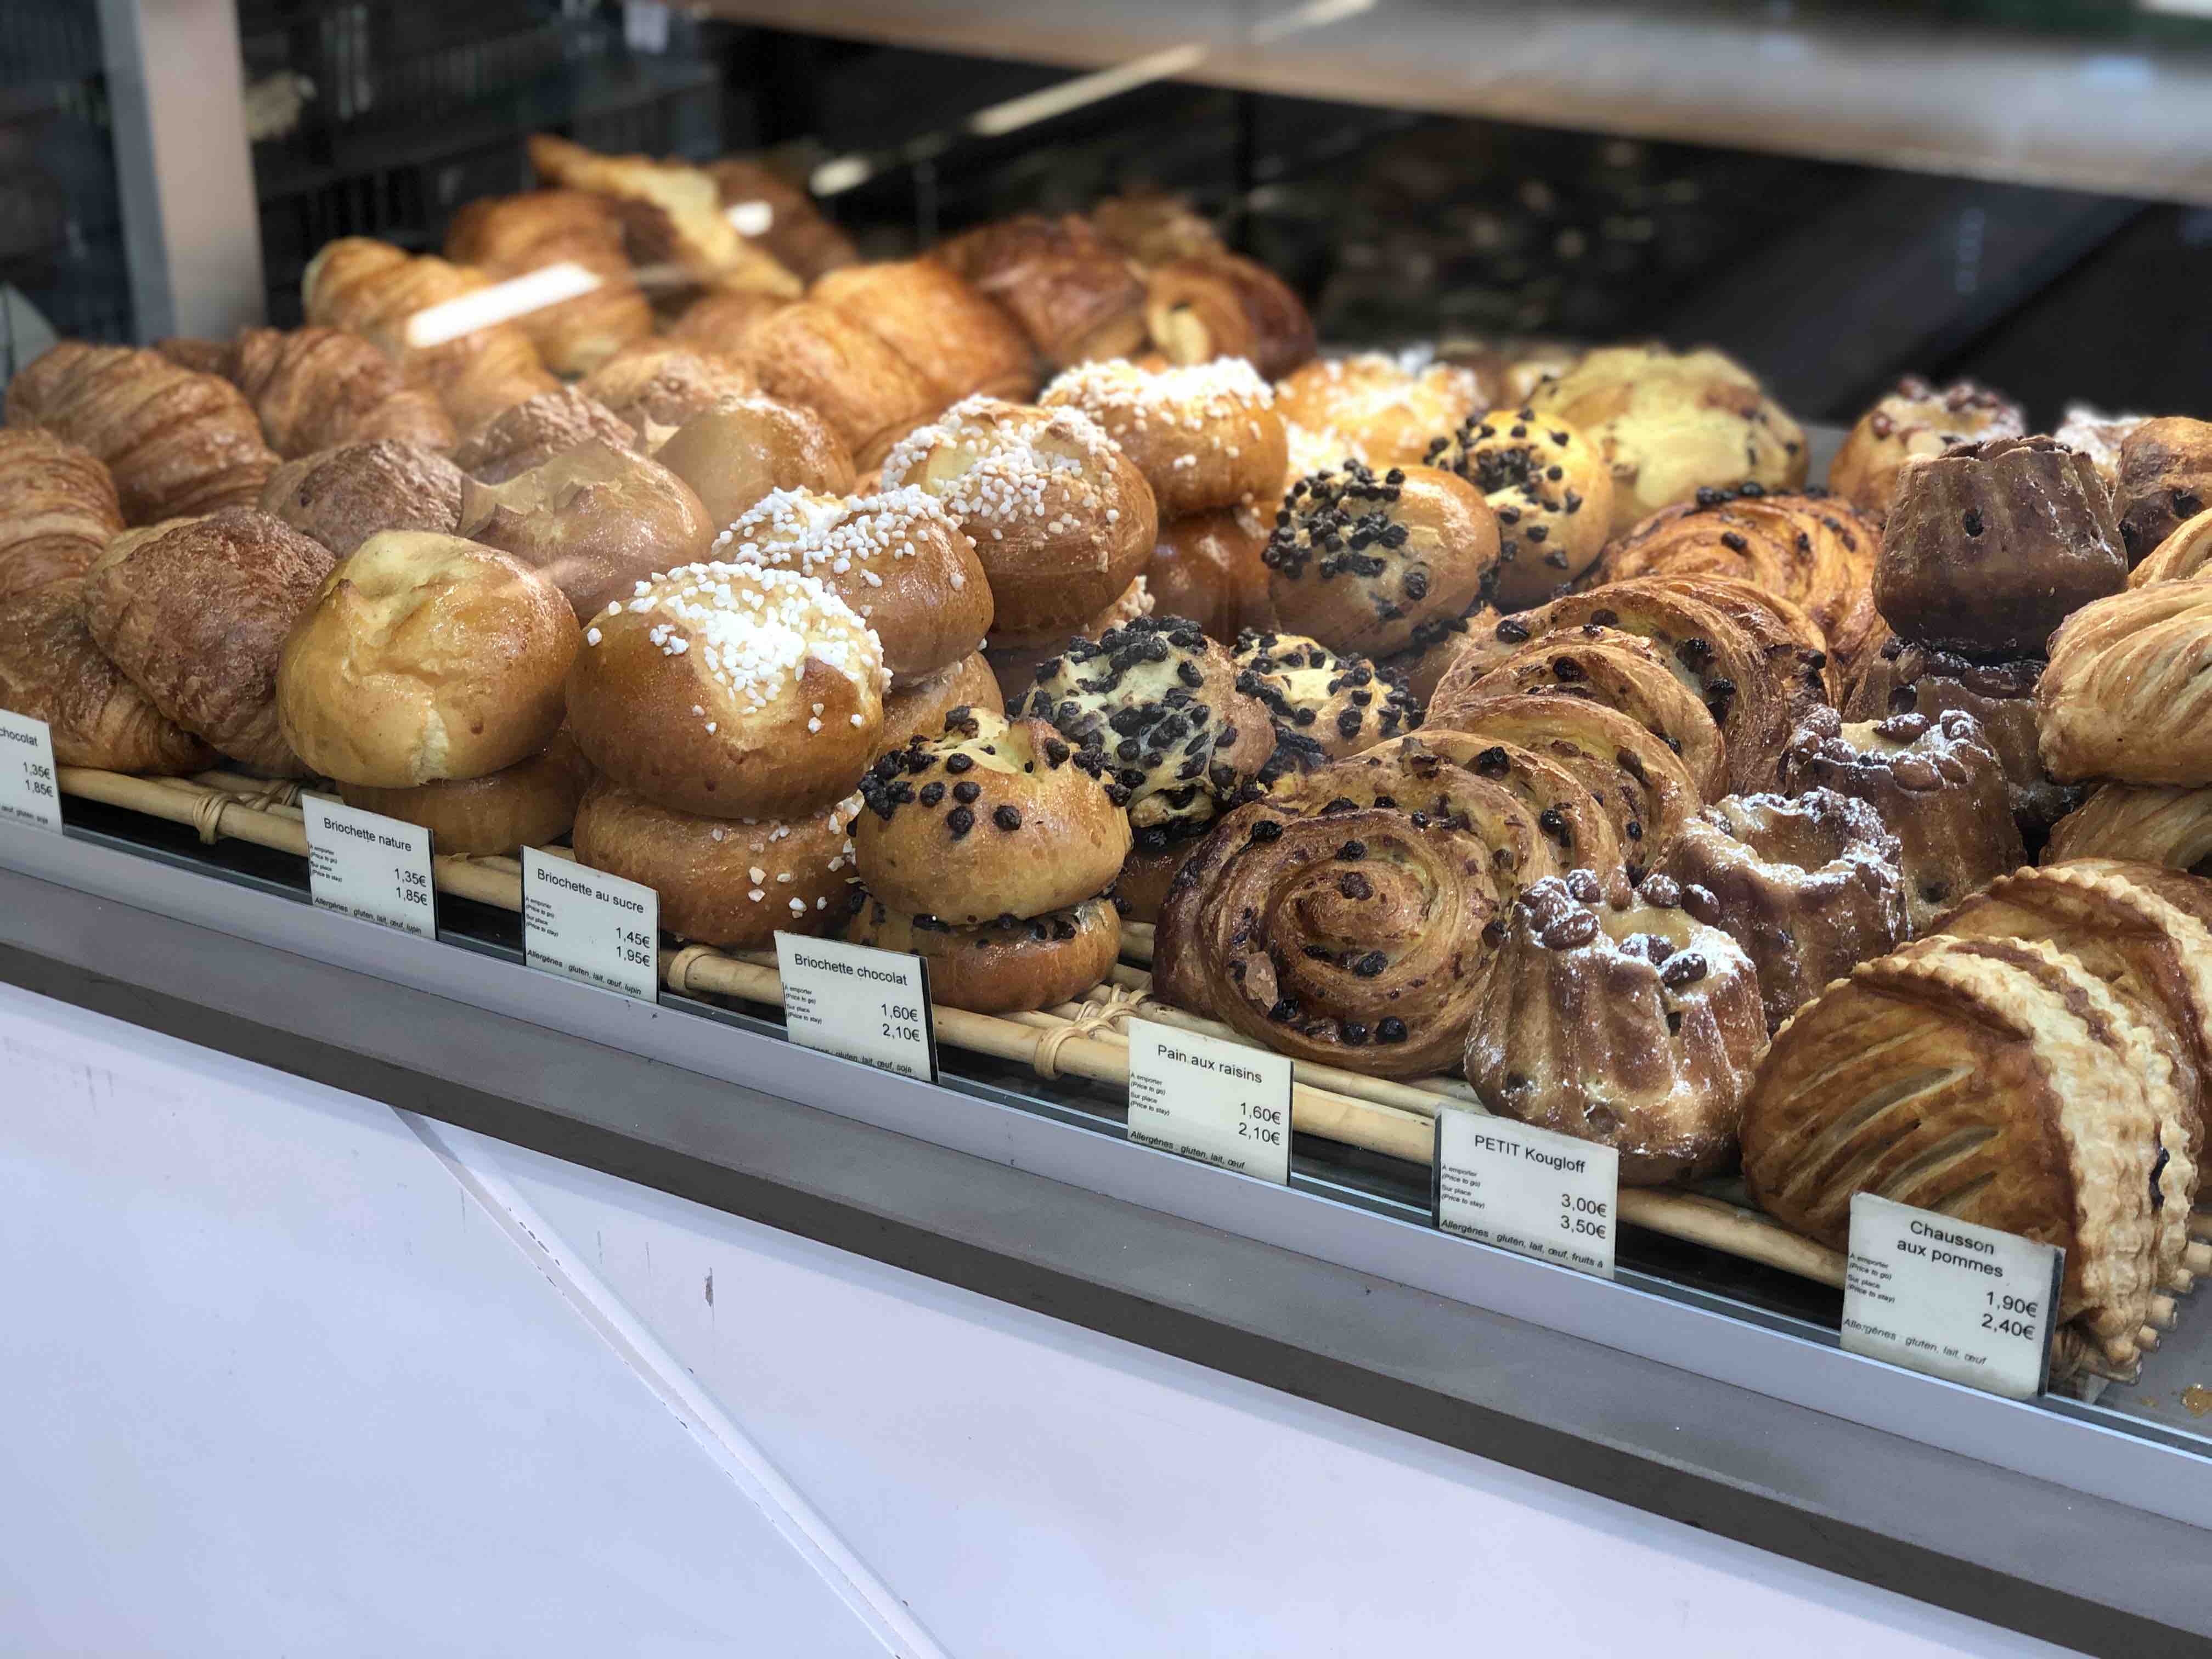 Paris baked goods at a small cafe across the street from the Gare de Lyon train station